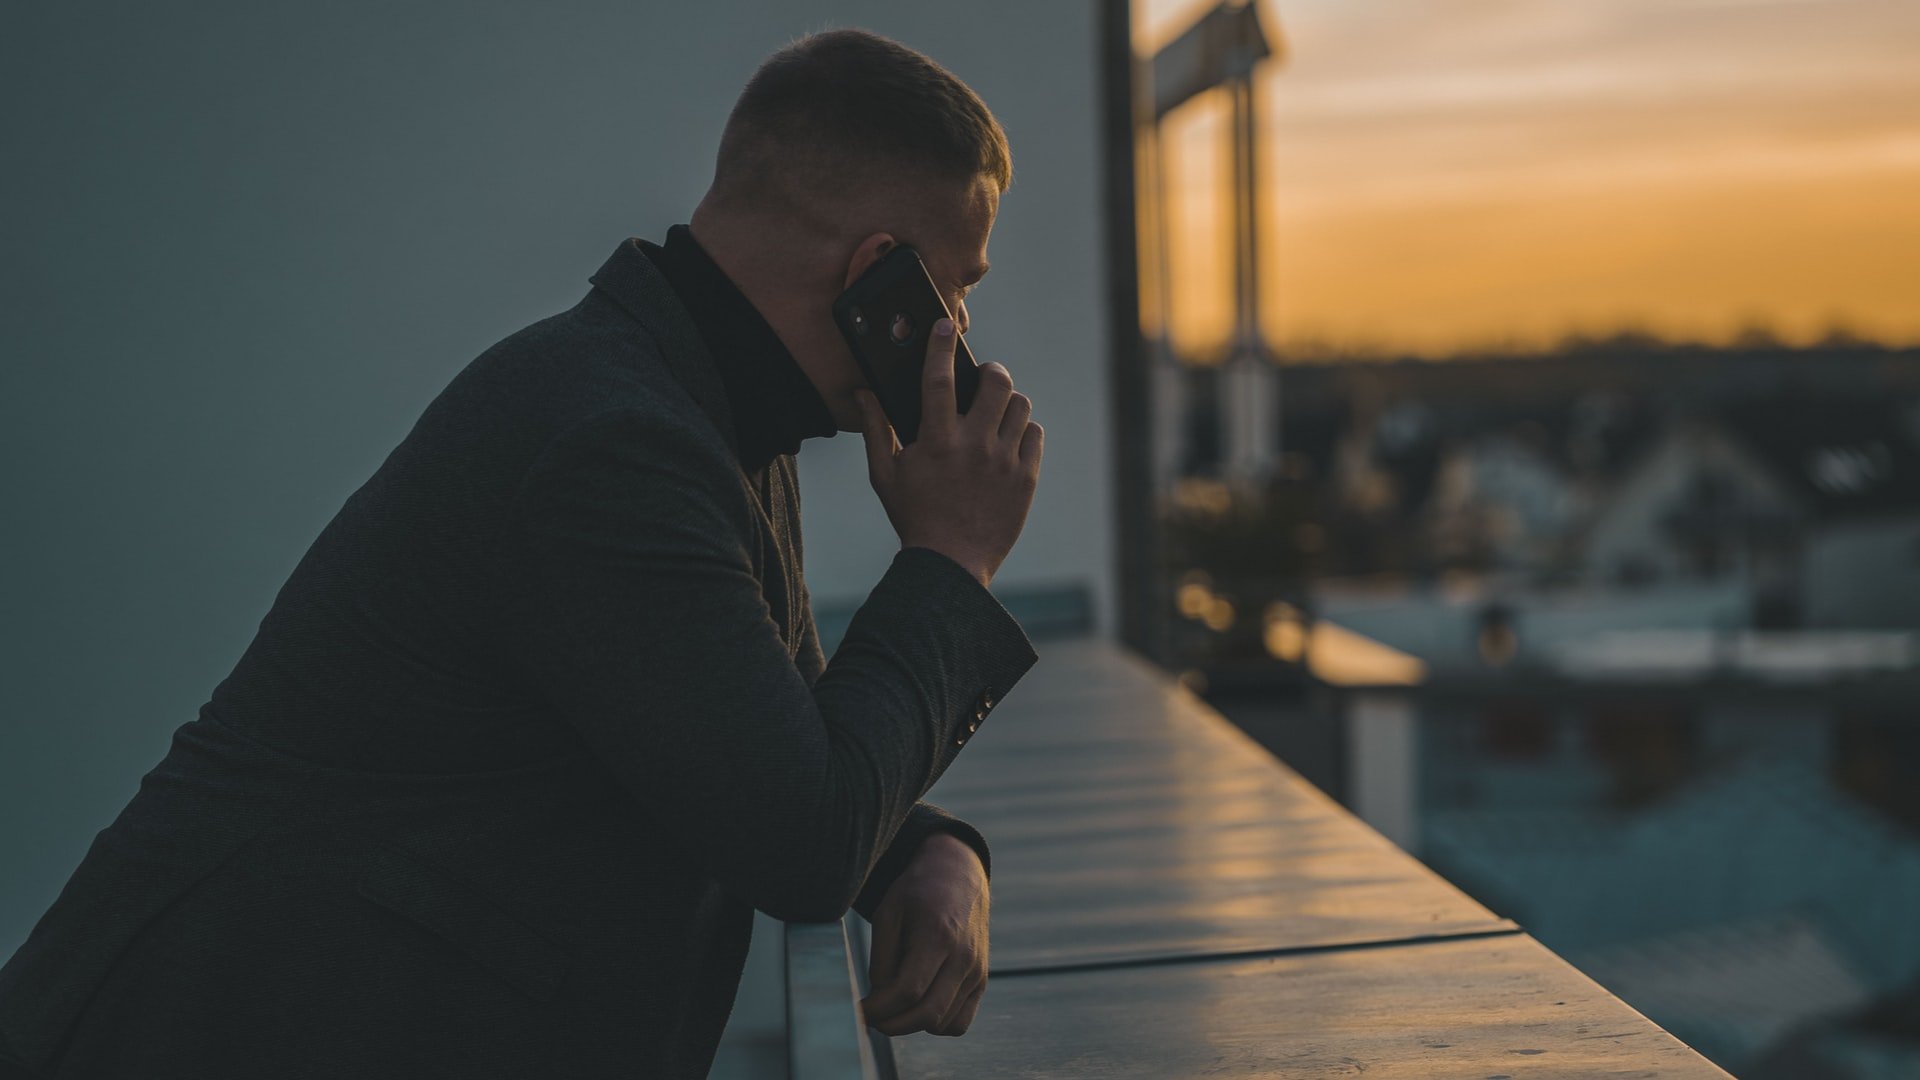 The man received a call from his family | Source: Unsplash